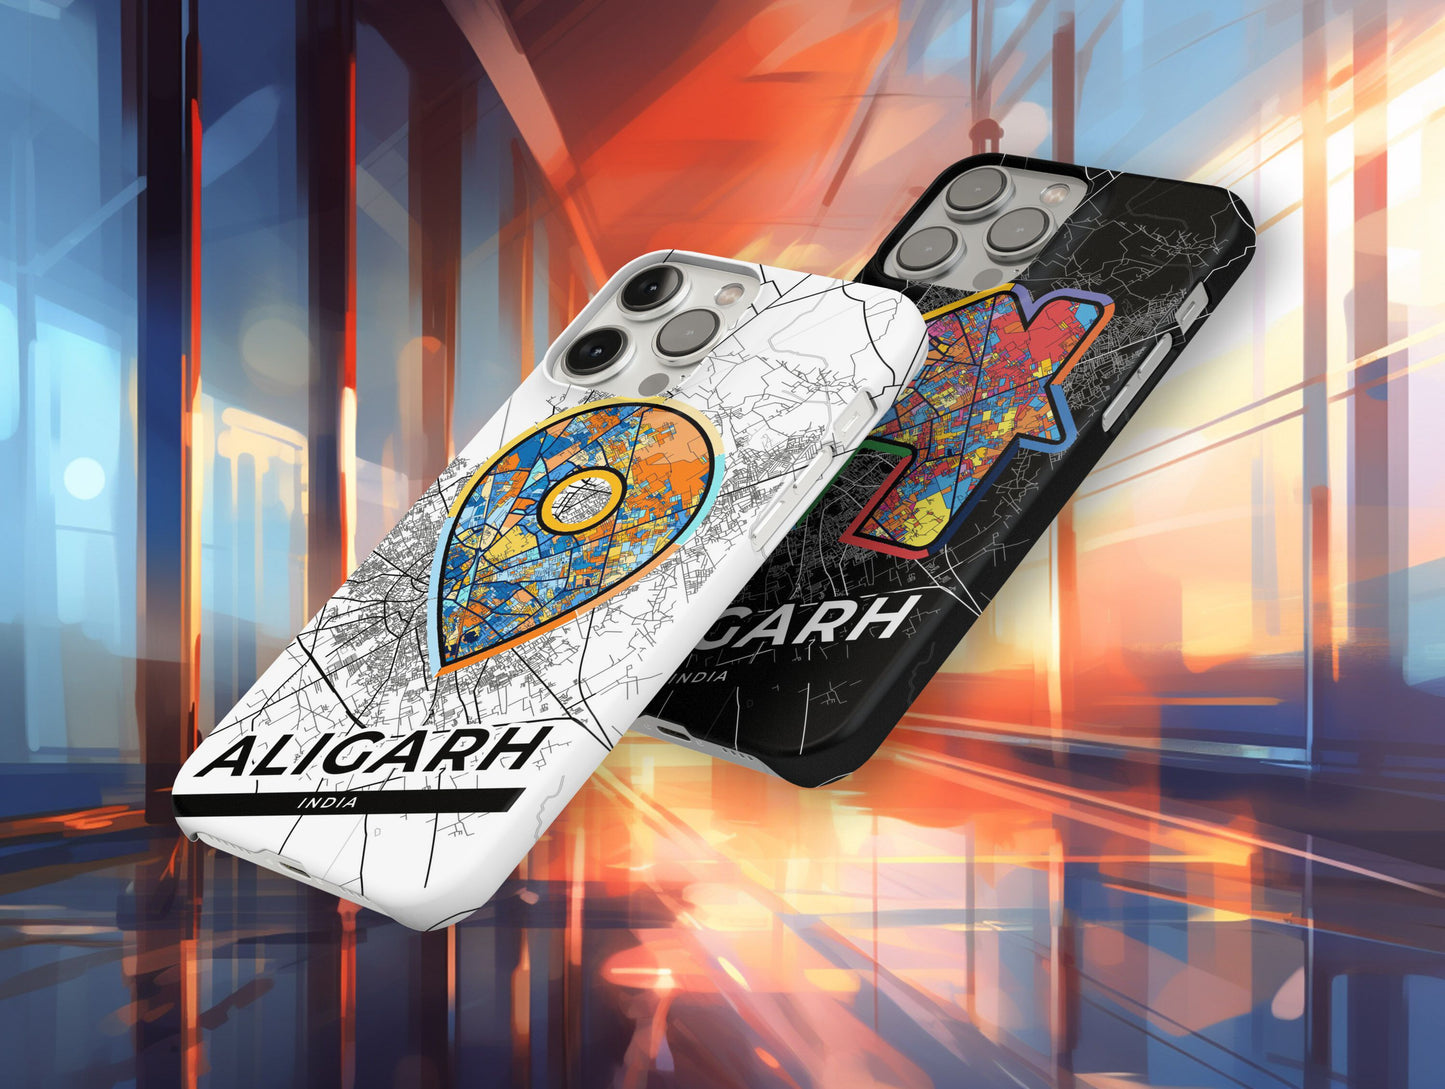 Aligarh India slim phone case with colorful icon. Birthday, wedding or housewarming gift. Couple match cases.